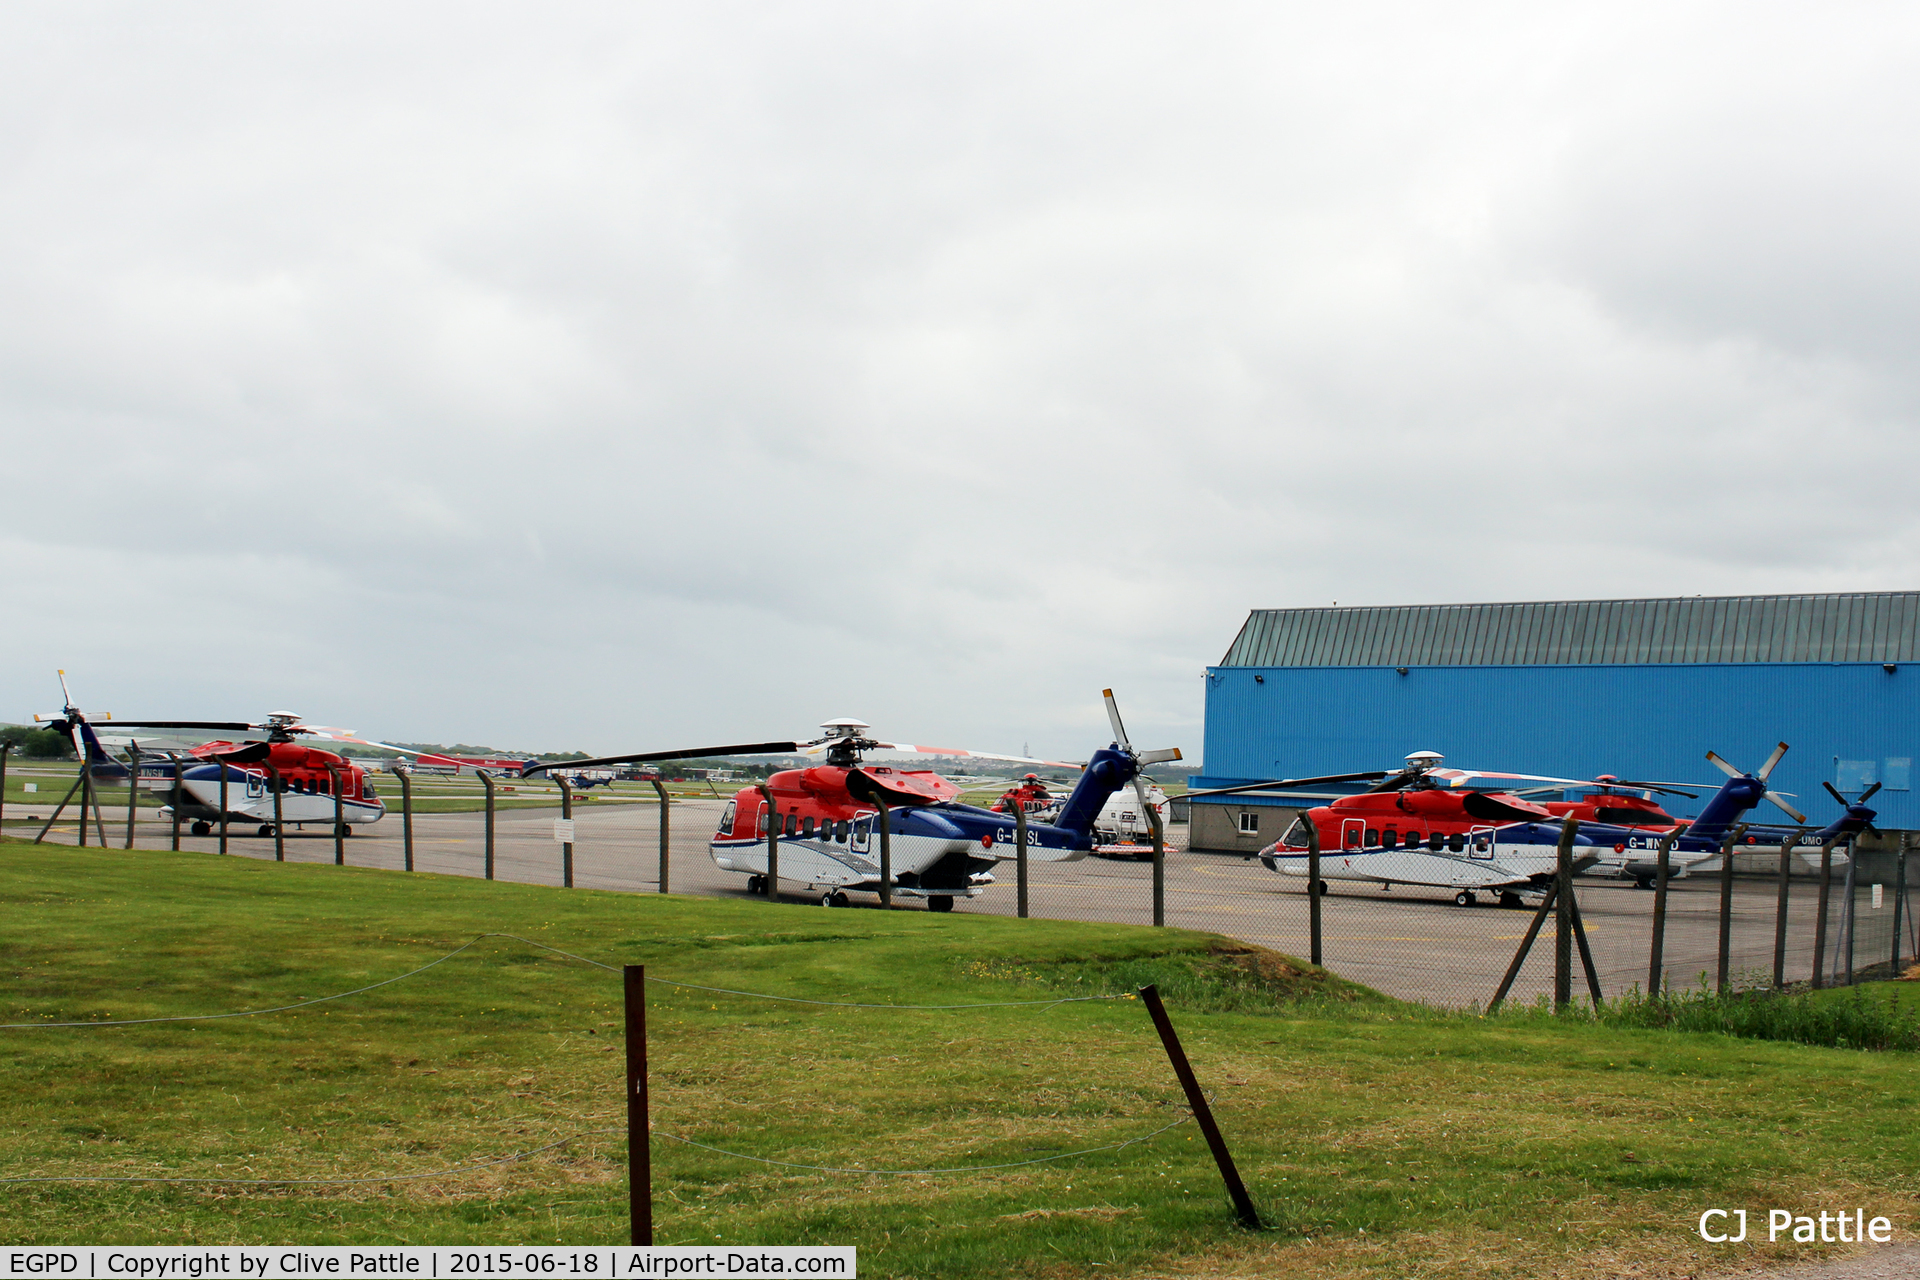 Aberdeen Airport, Aberdeen, Scotland United Kingdom (EGPD) - One of the apron parking areas of CHC Scotia Helicopters at Aberdeen, Scotland EGPD